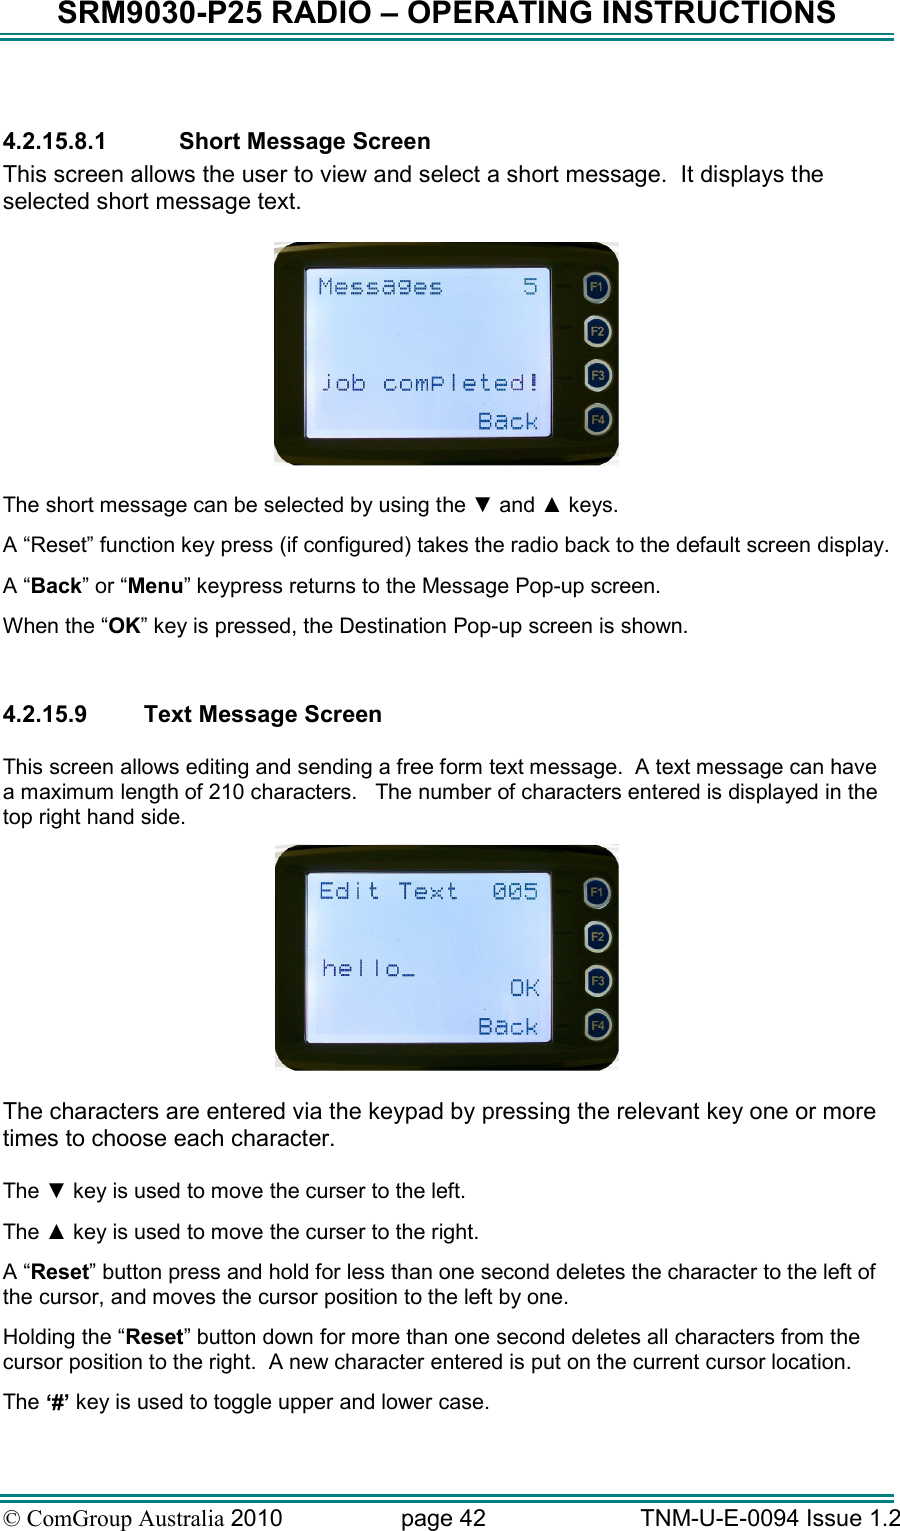 SRM9030-P25 RADIO – OPERATING INSTRUCTIONS © ComGroup Australia 2010  page 42   TNM-U-E-0094 Issue 1.2  4.2.15.8.1  Short Message Screen This screen allows the user to view and select a short message.  It displays the selected short message text.    The short message can be selected by using the ▼ and ▲ keys. A “Reset” function key press (if configured) takes the radio back to the default screen display. A “Back” or “Menu” keypress returns to the Message Pop-up screen.  When the “OK” key is pressed, the Destination Pop-up screen is shown.  4.2.15.9  Text Message Screen  This screen allows editing and sending a free form text message.  A text message can have a maximum length of 210 characters.   The number of characters entered is displayed in the top right hand side.   The characters are entered via the keypad by pressing the relevant key one or more times to choose each character.  The ▼ key is used to move the curser to the left. The ▲ key is used to move the curser to the right. A “Reset” button press and hold for less than one second deletes the character to the left of the cursor, and moves the cursor position to the left by one.   Holding the “Reset” button down for more than one second deletes all characters from the cursor position to the right.  A new character entered is put on the current cursor location.   The ‘#’ key is used to toggle upper and lower case. 